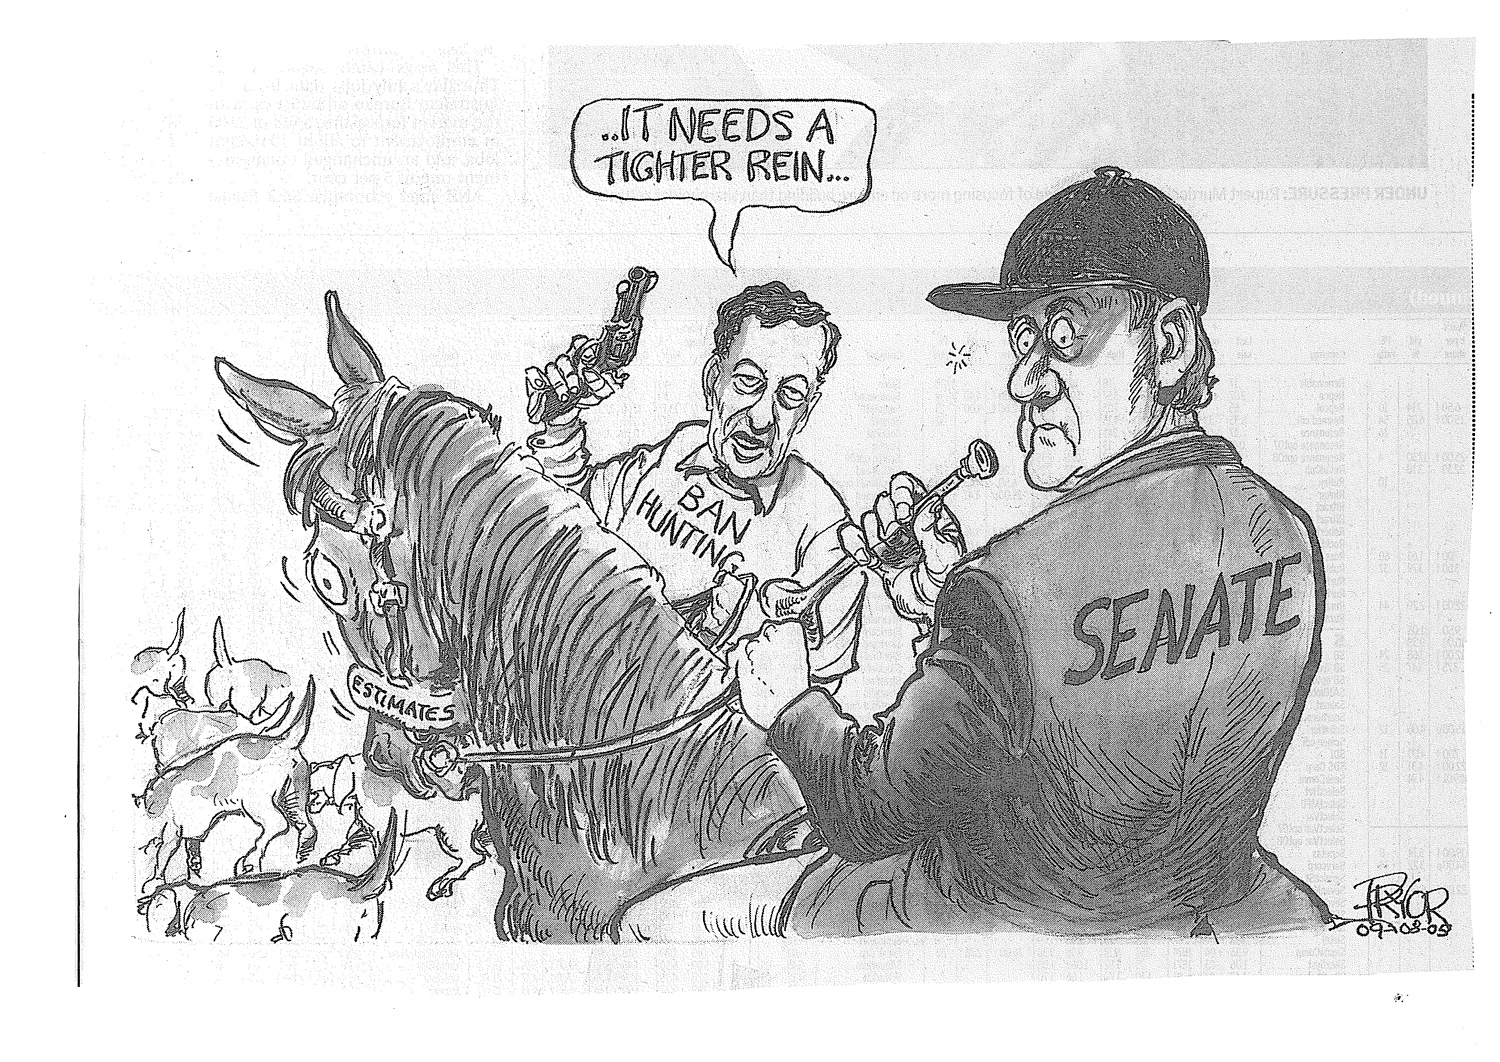 Geoff Pryor, 'It needs a tighter rein…', The Canberra Times, 9 August 2005